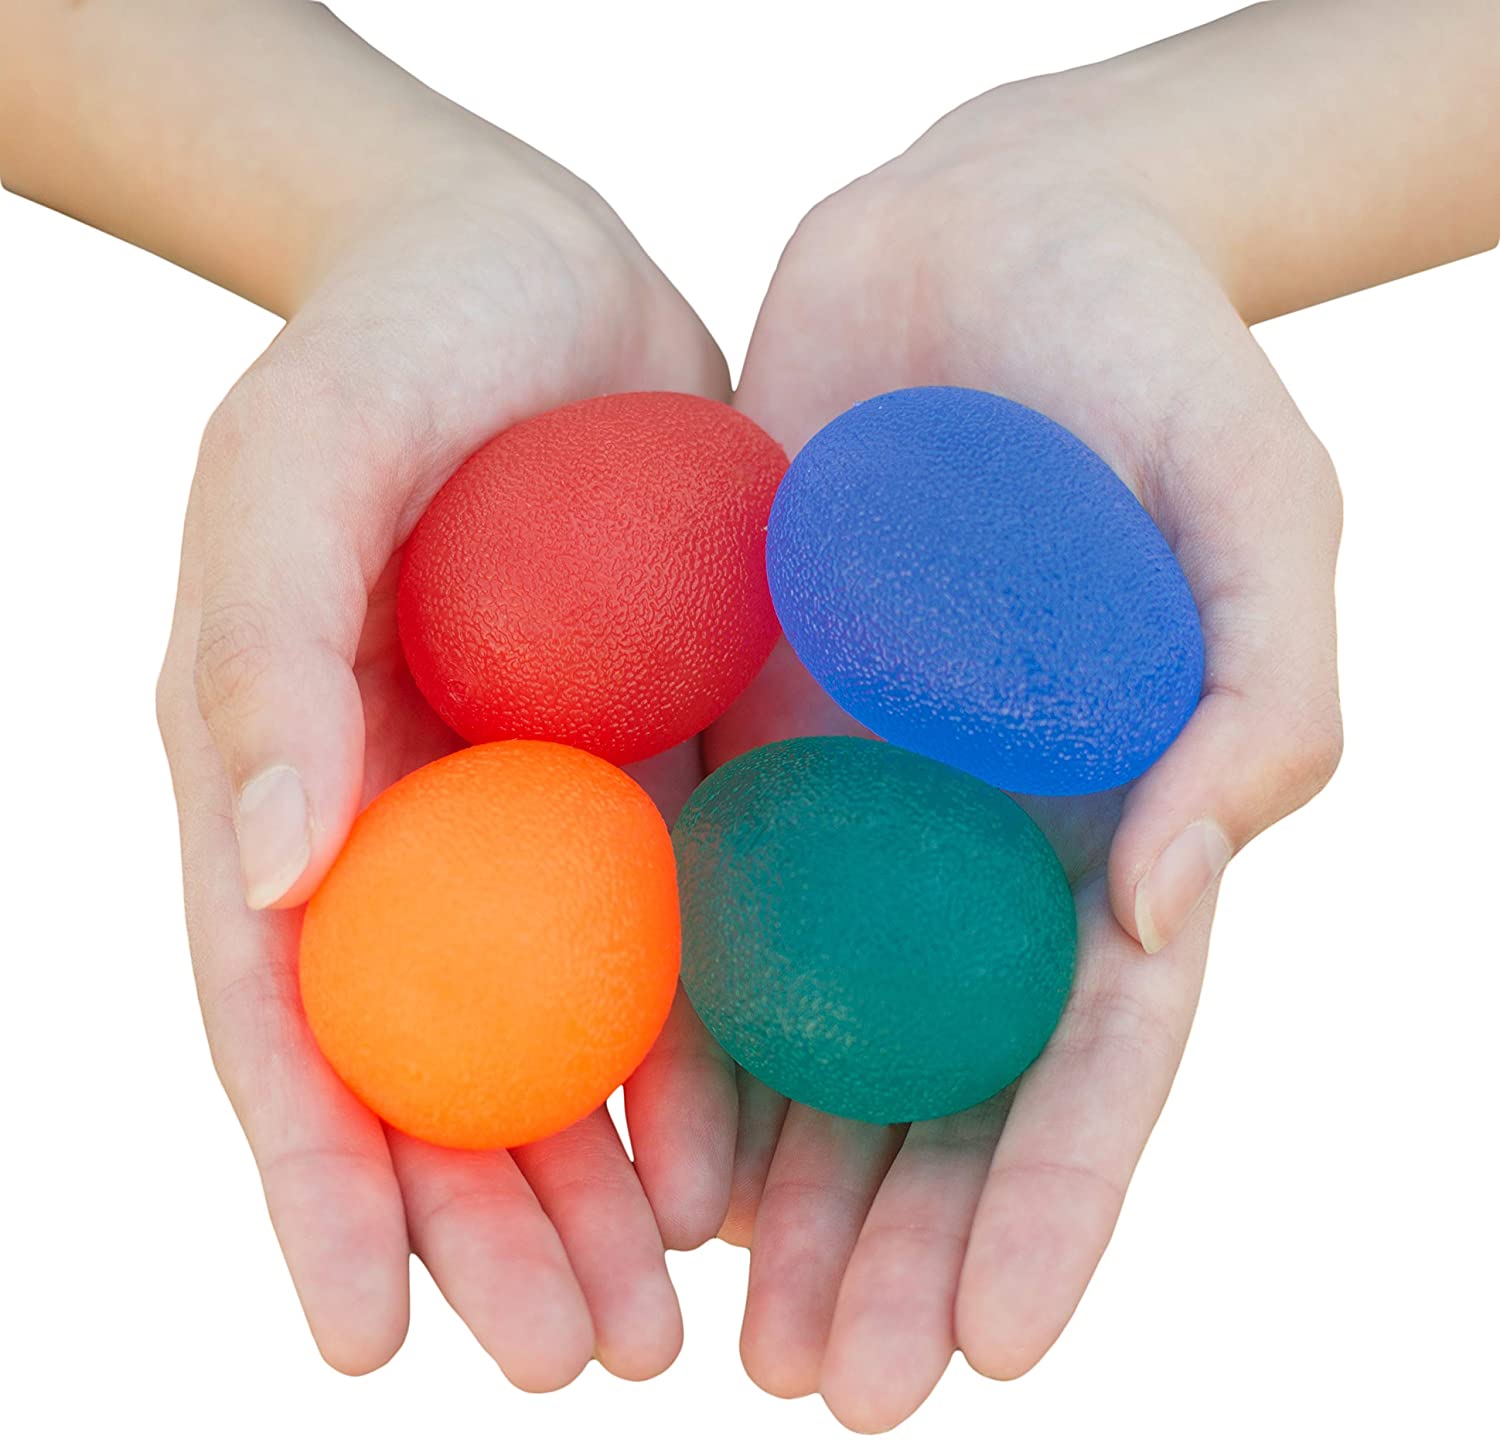 RMS Assorted Resistance Levels Hand Exercise Balls Occupational & Physical Therapy Aids, 4-Count